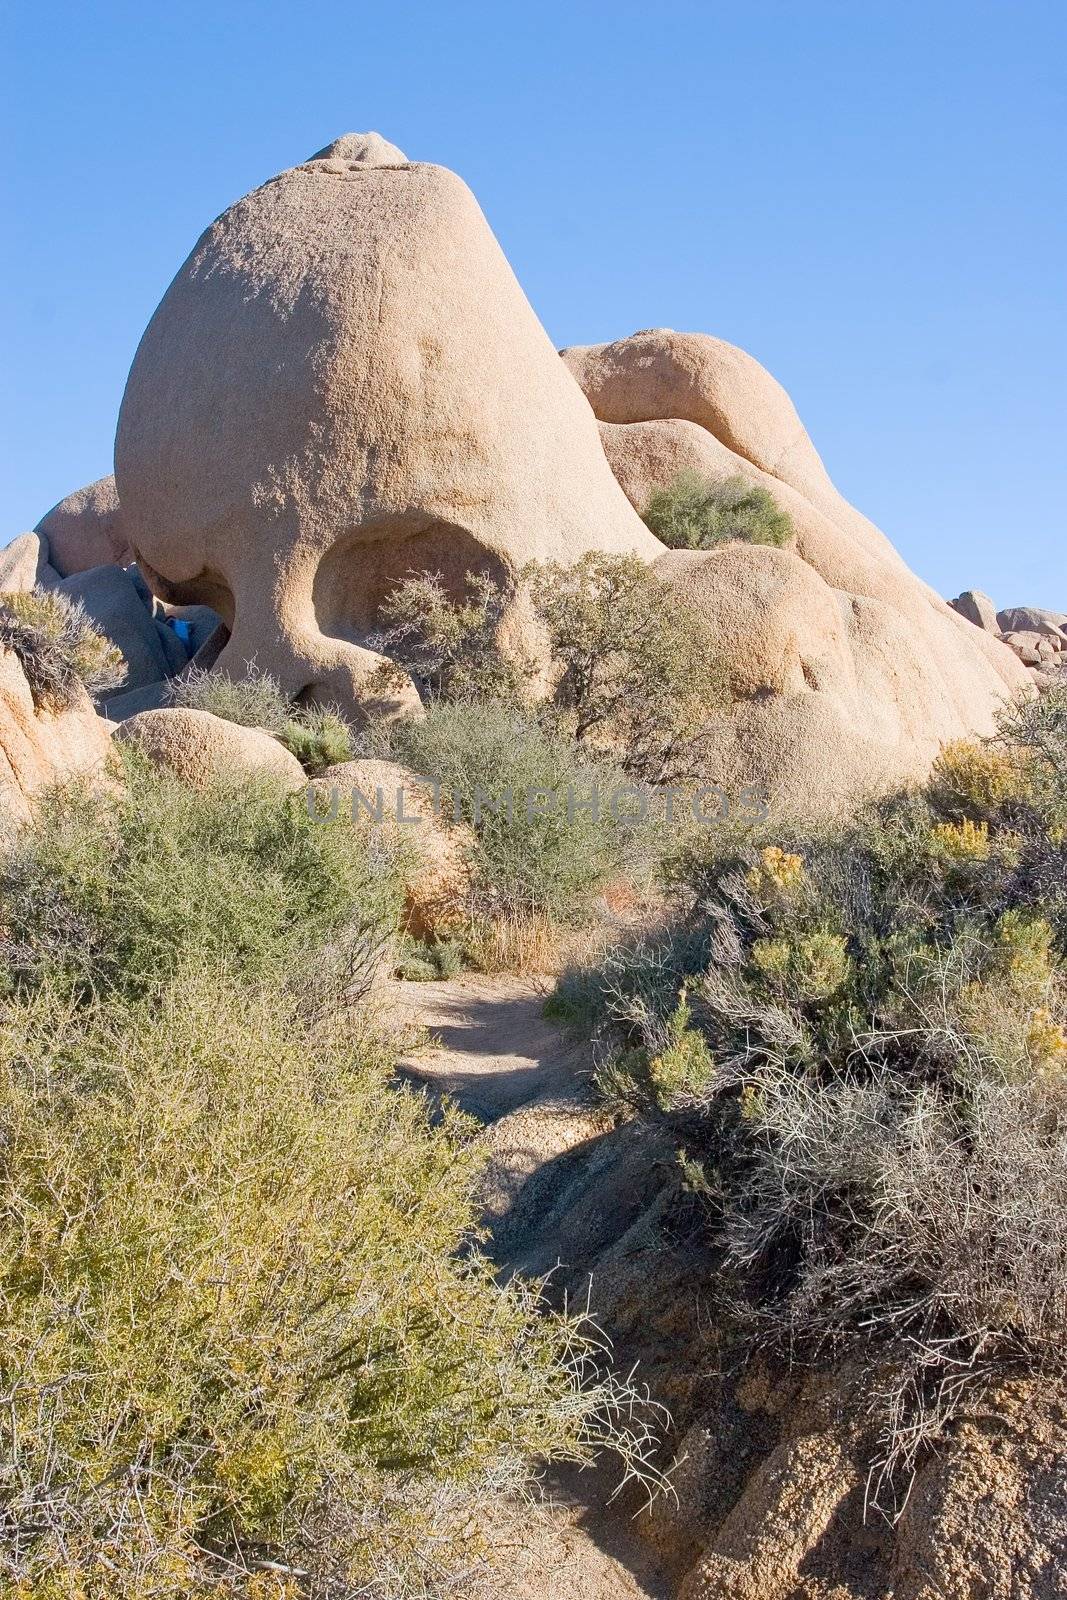 Skull Rock - formation located in Joshua Tree National Park, United States, along the main east-west park road.